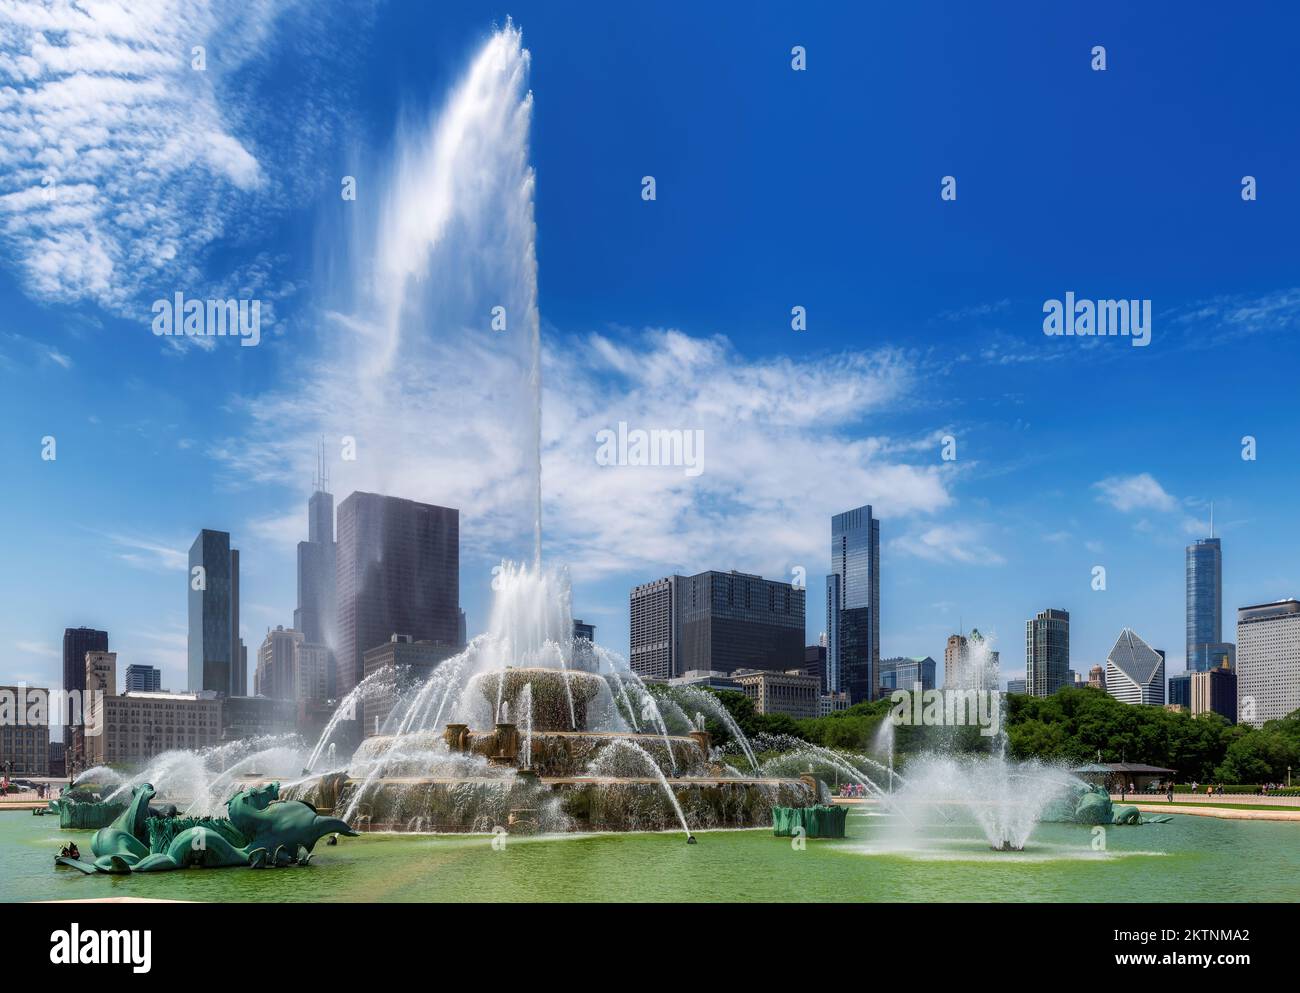 Chicago skyline with skyscrapers and Buckingham fountain at sunny day, Chicago, Illinois, USA. Stock Photo